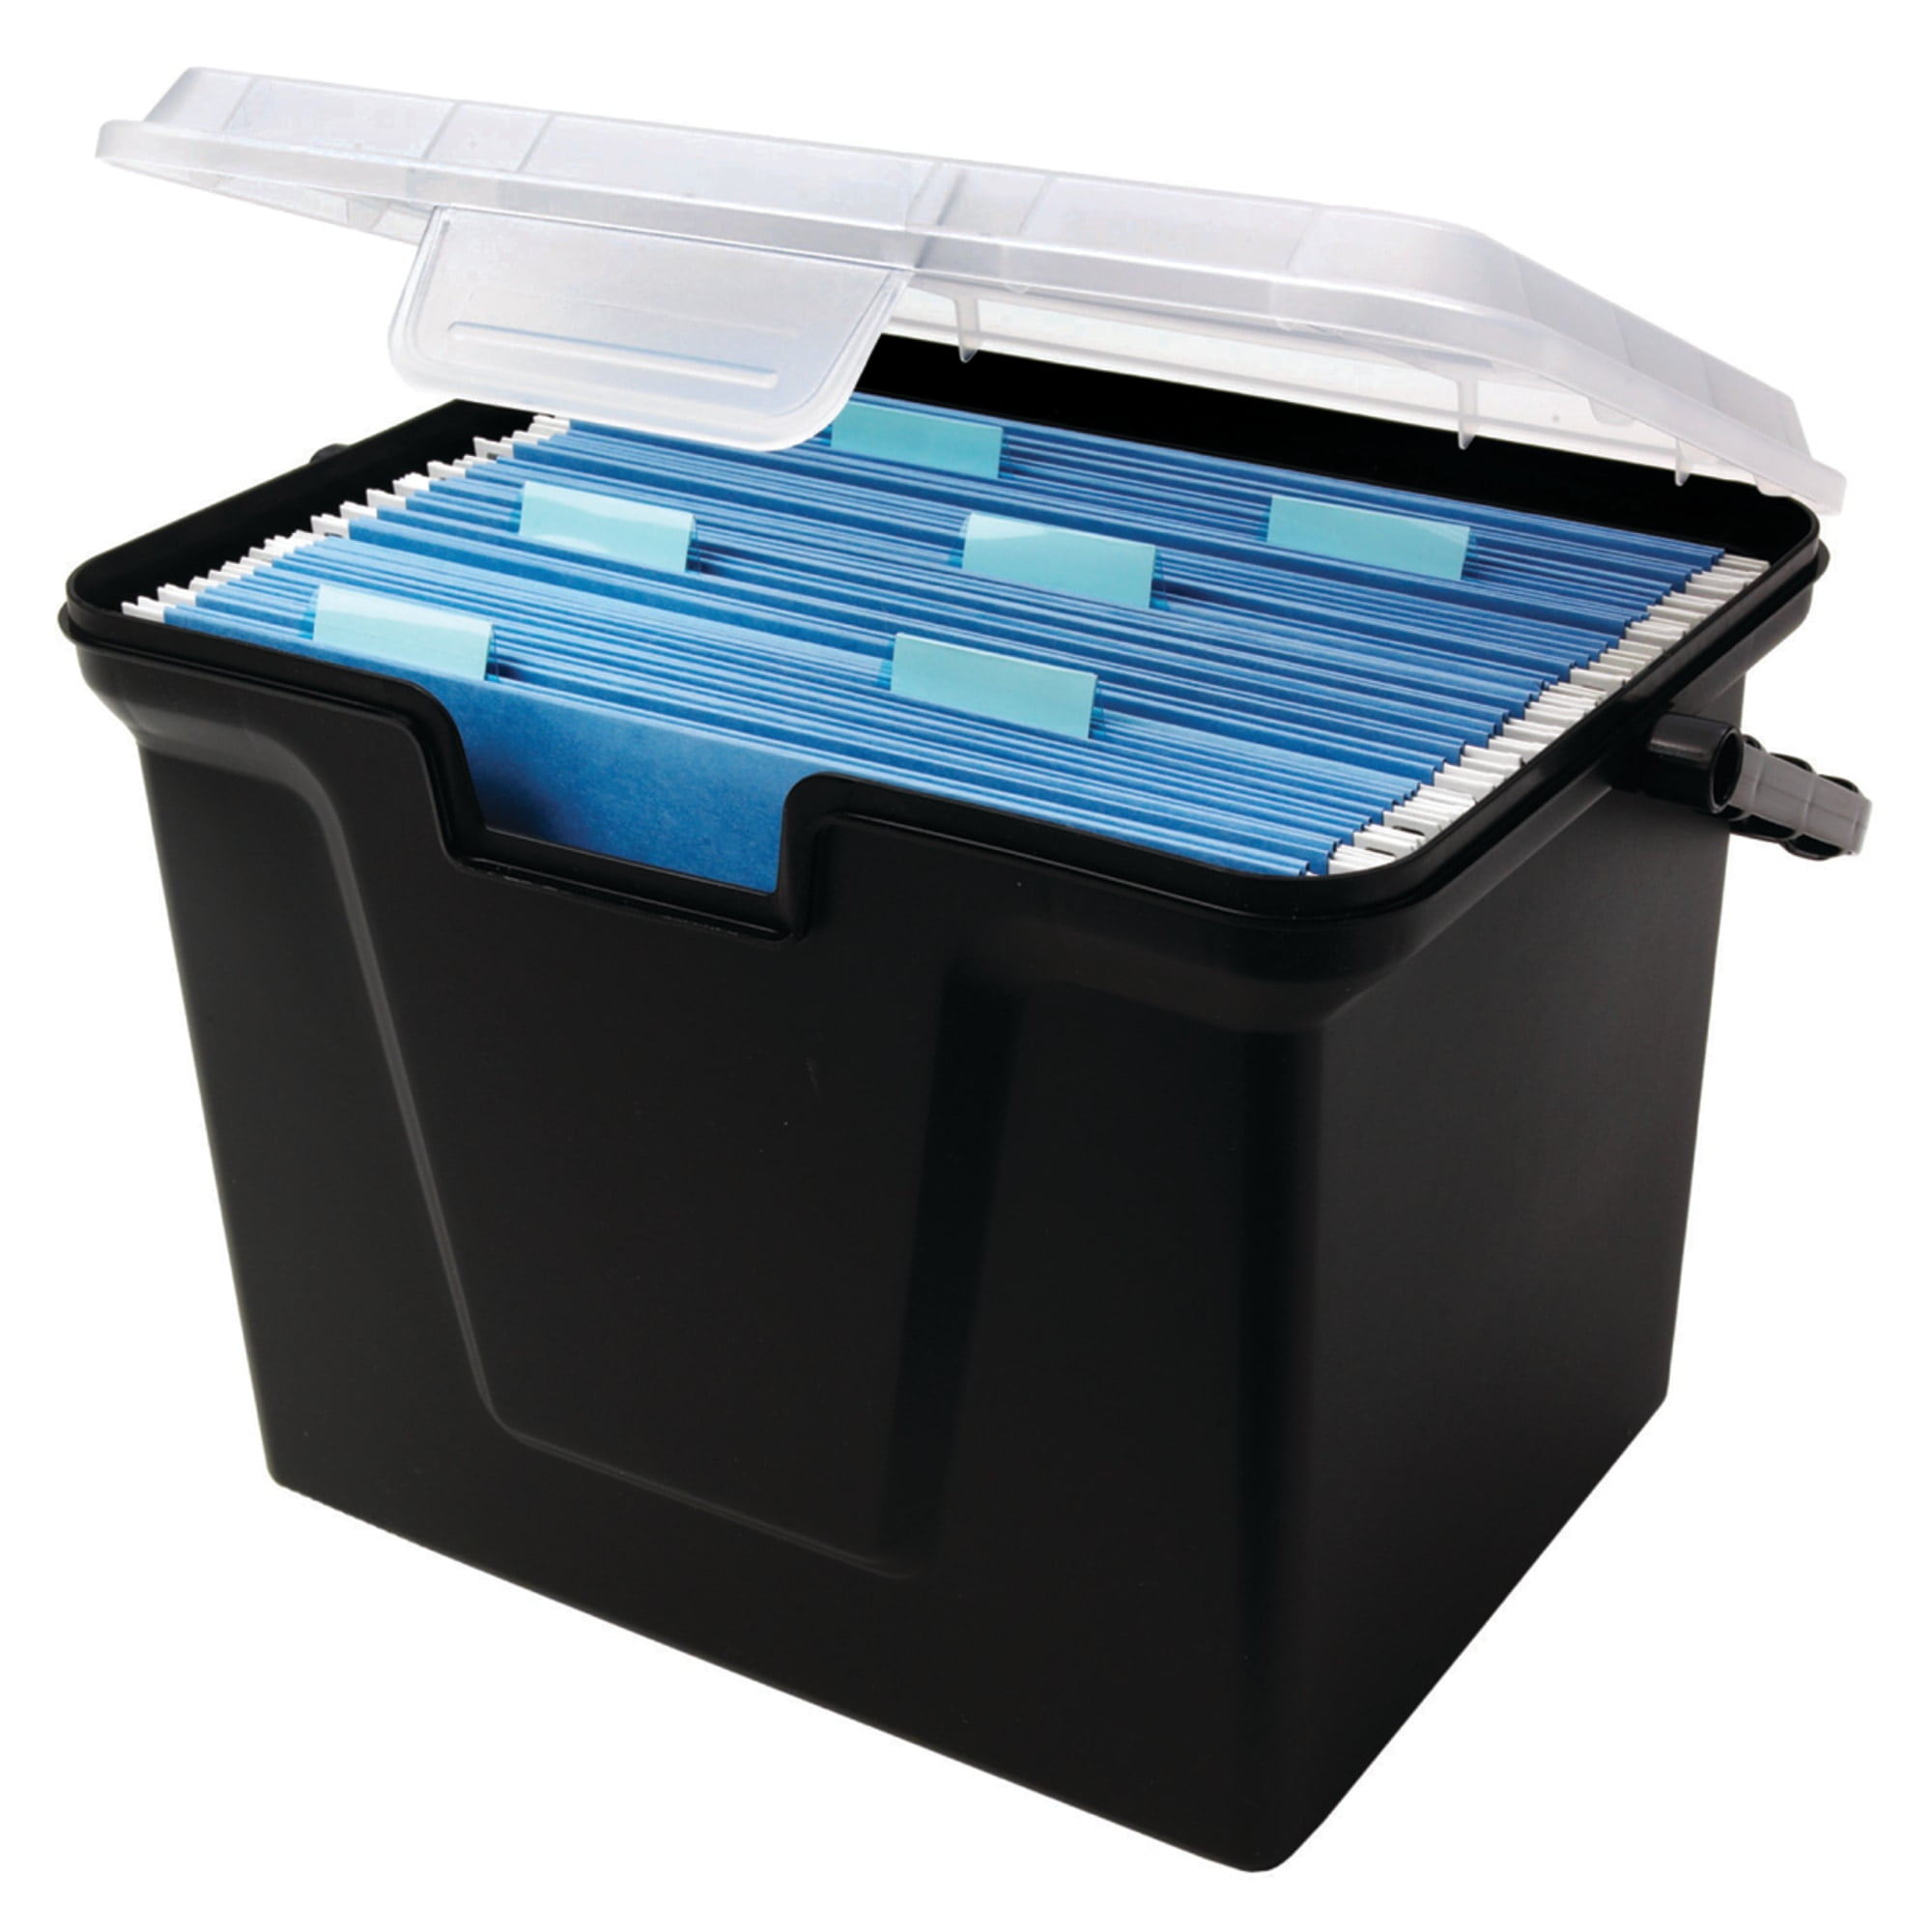 IRS 110350 Weather Tight Portable File Box Clear for sale online 